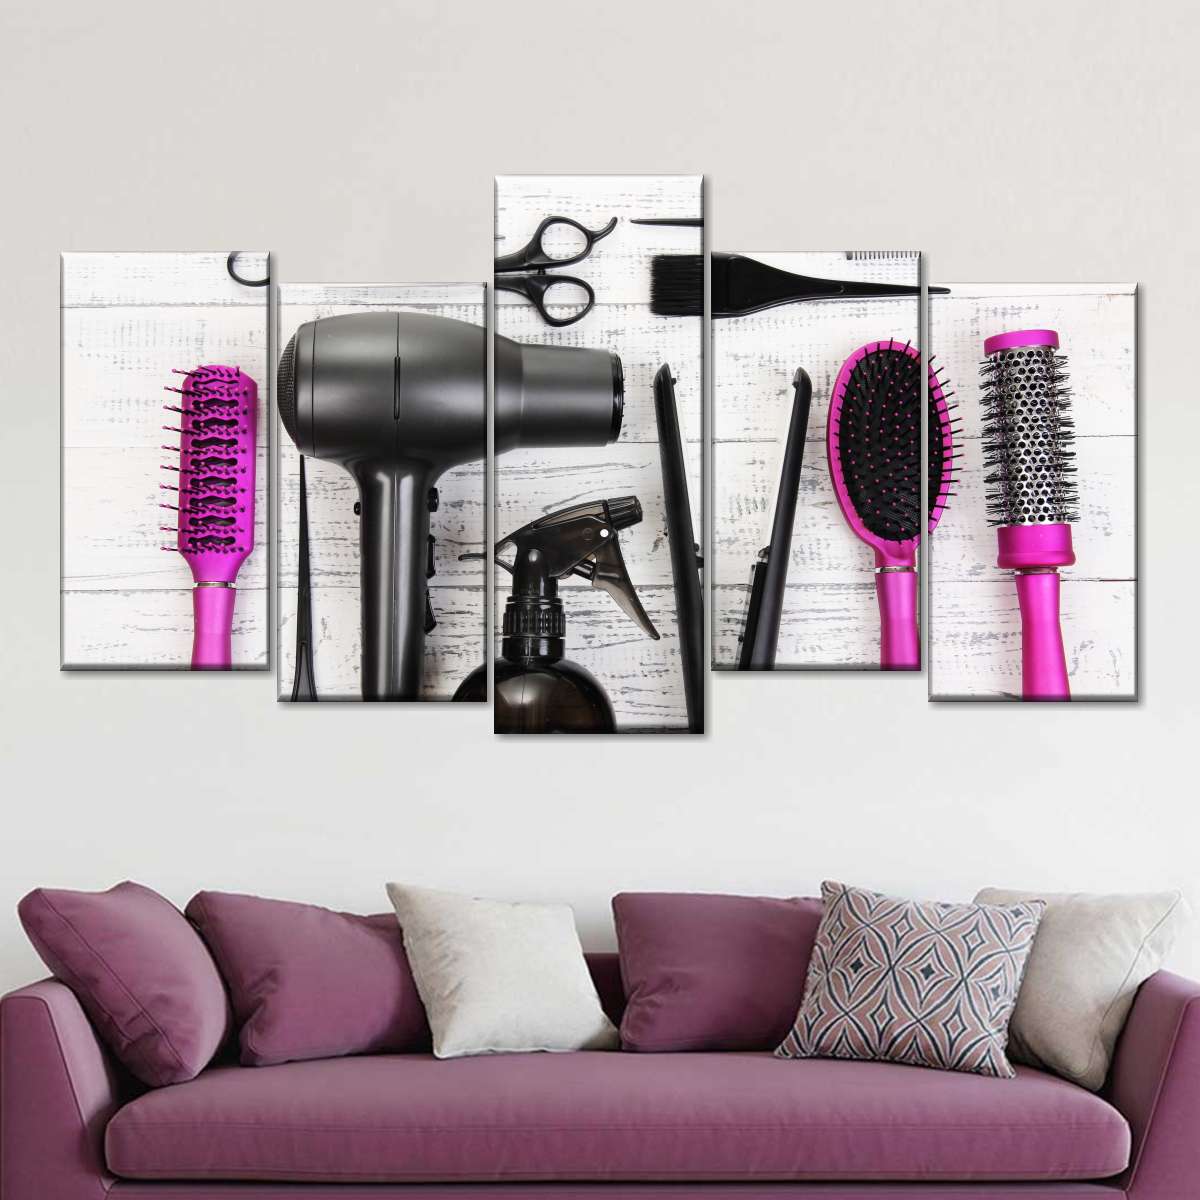 TutuBeer Salon Wall Decor Hair Salon Wall Art for Home Pictures for Salon H  その他インテリア雑貨、小物